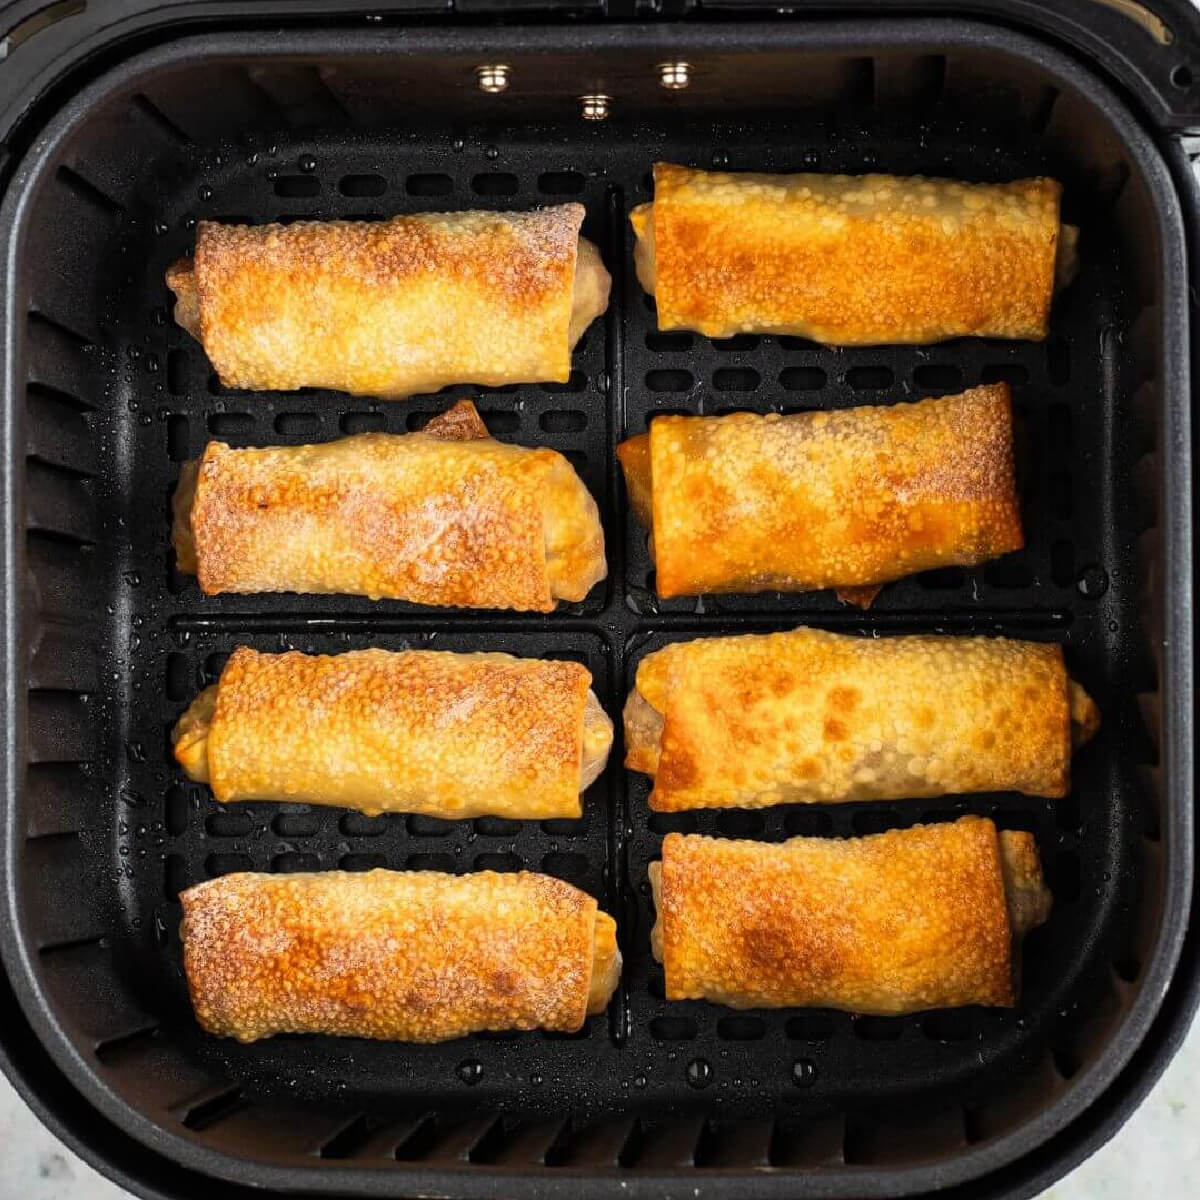 Egg rolls in the air fryer basket, fully cooked, and ready to serve.